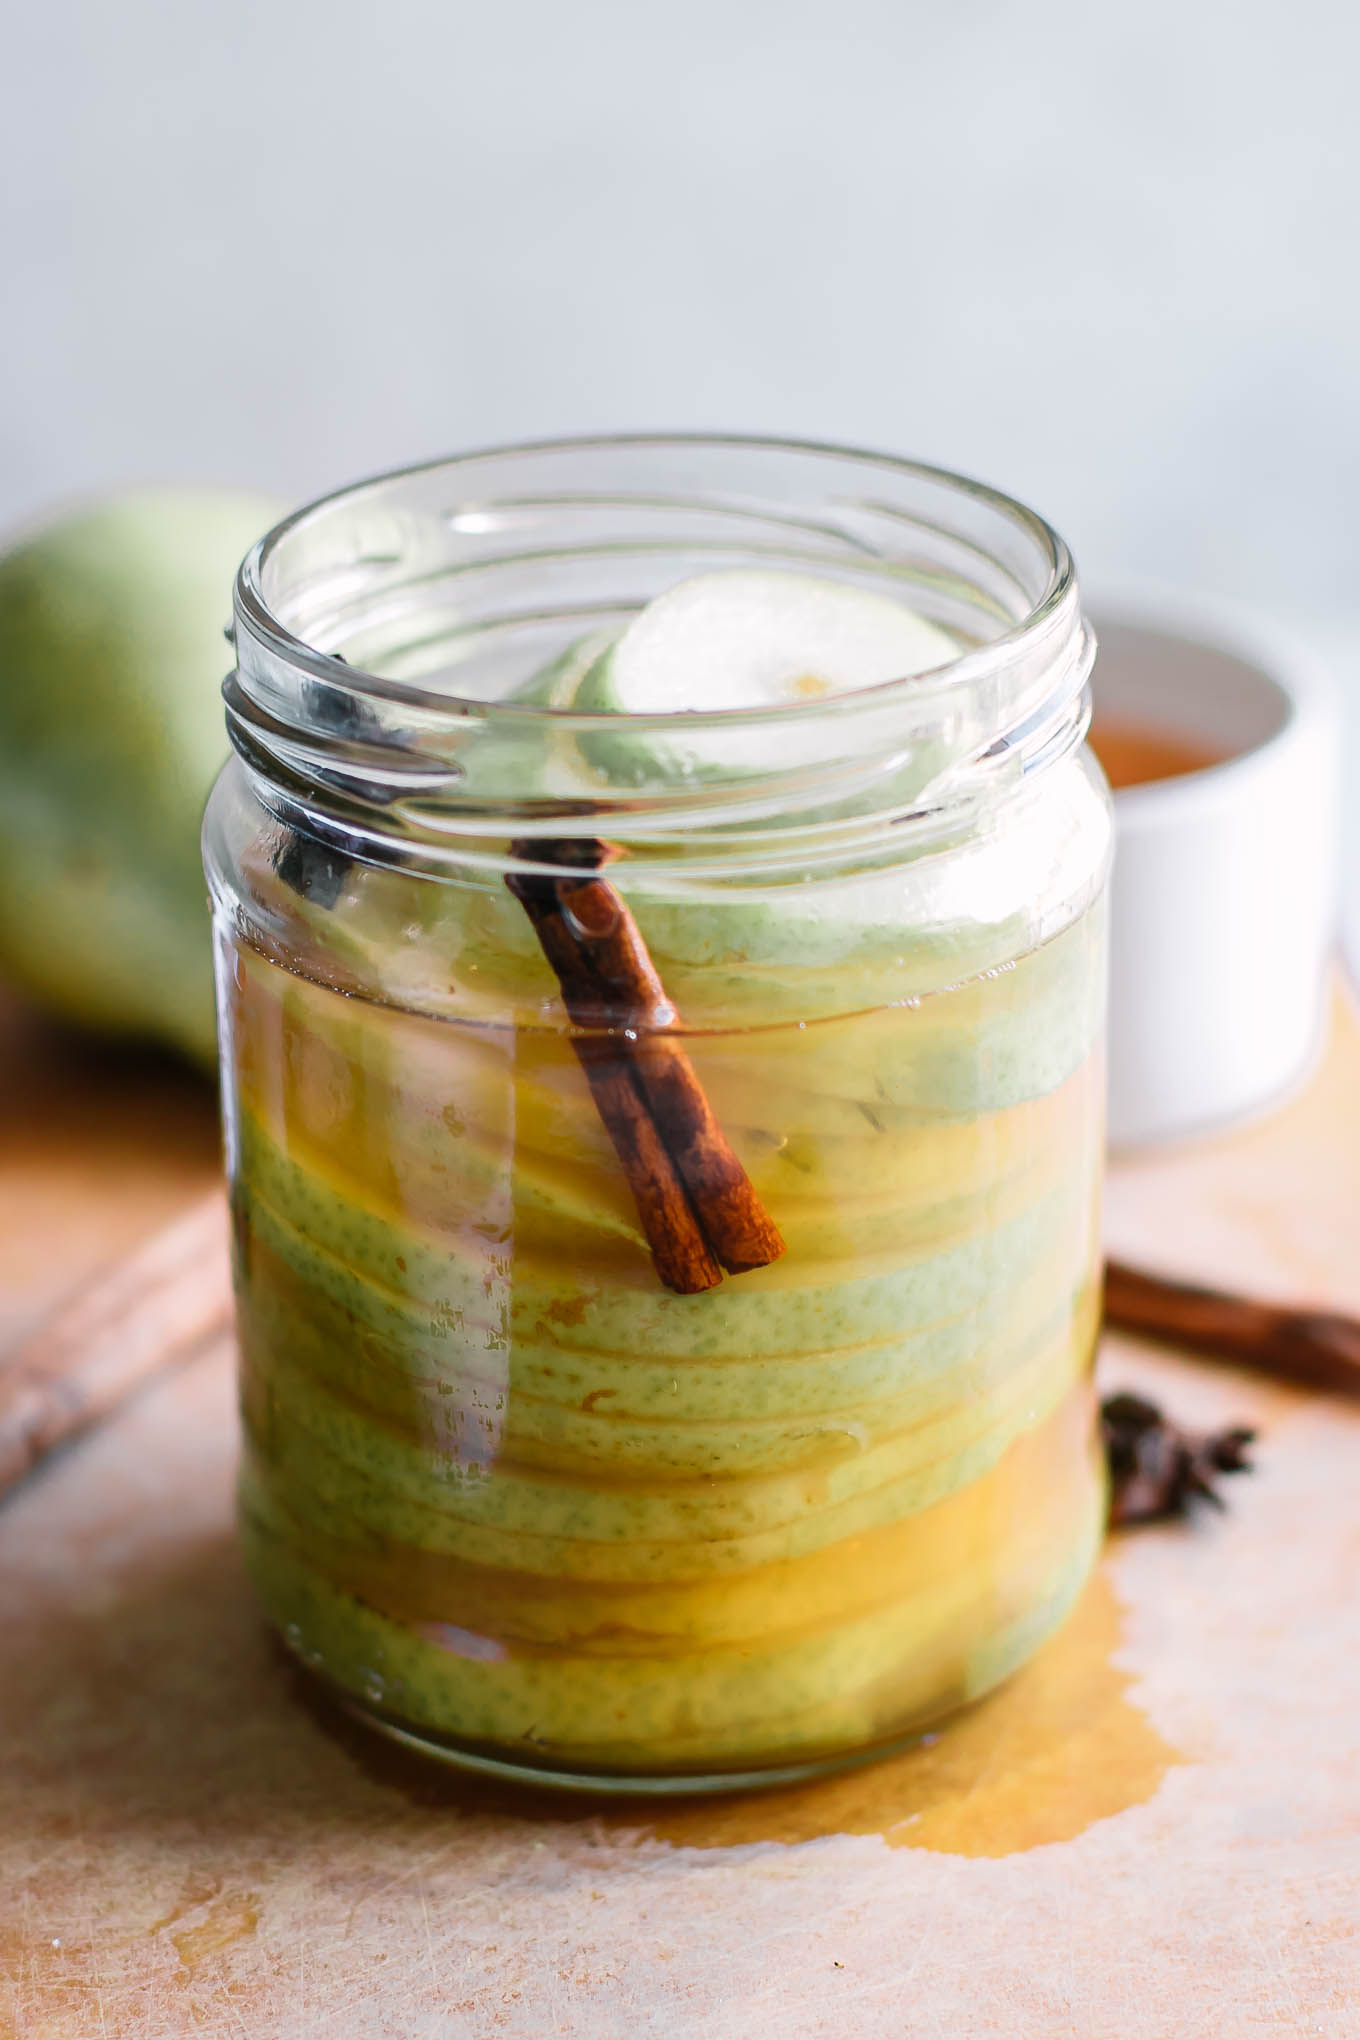 pickled pears in a jar with a cinnamon stick on a wood table